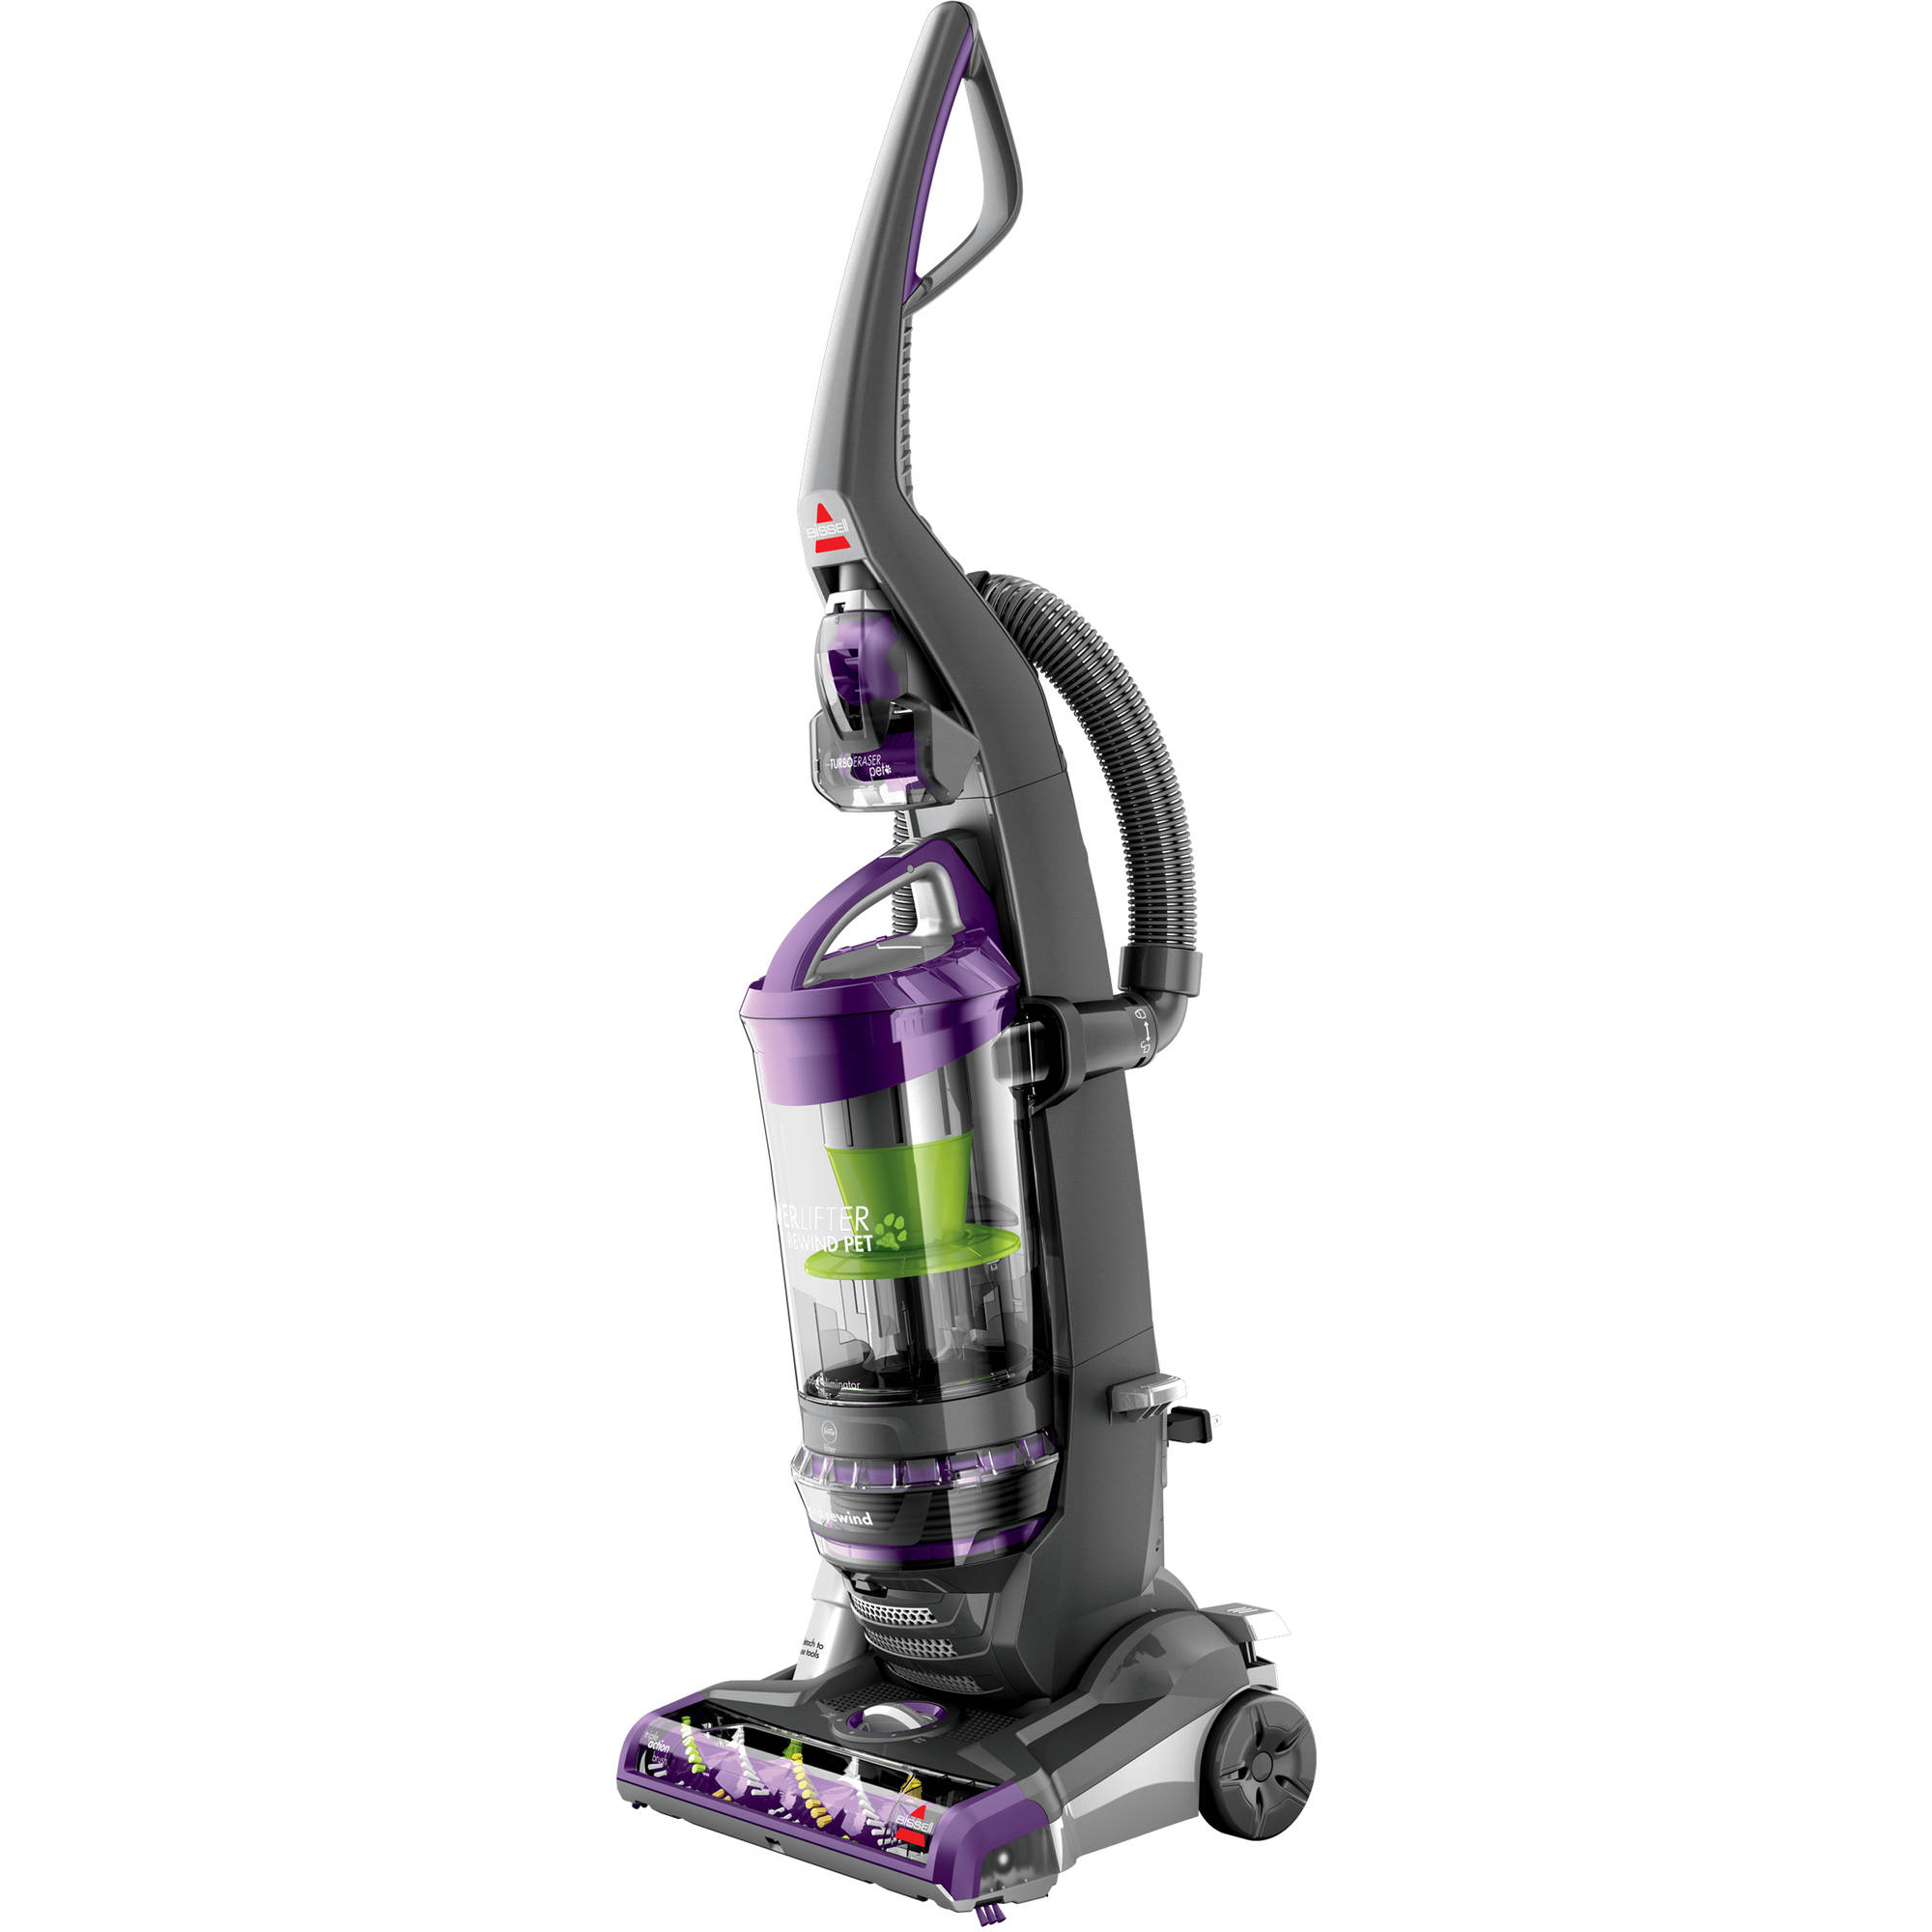 Bissell PowerLifter Pet Rewind Bagless Upright Vacuum Cleaner, 1792 - image 2 of 9